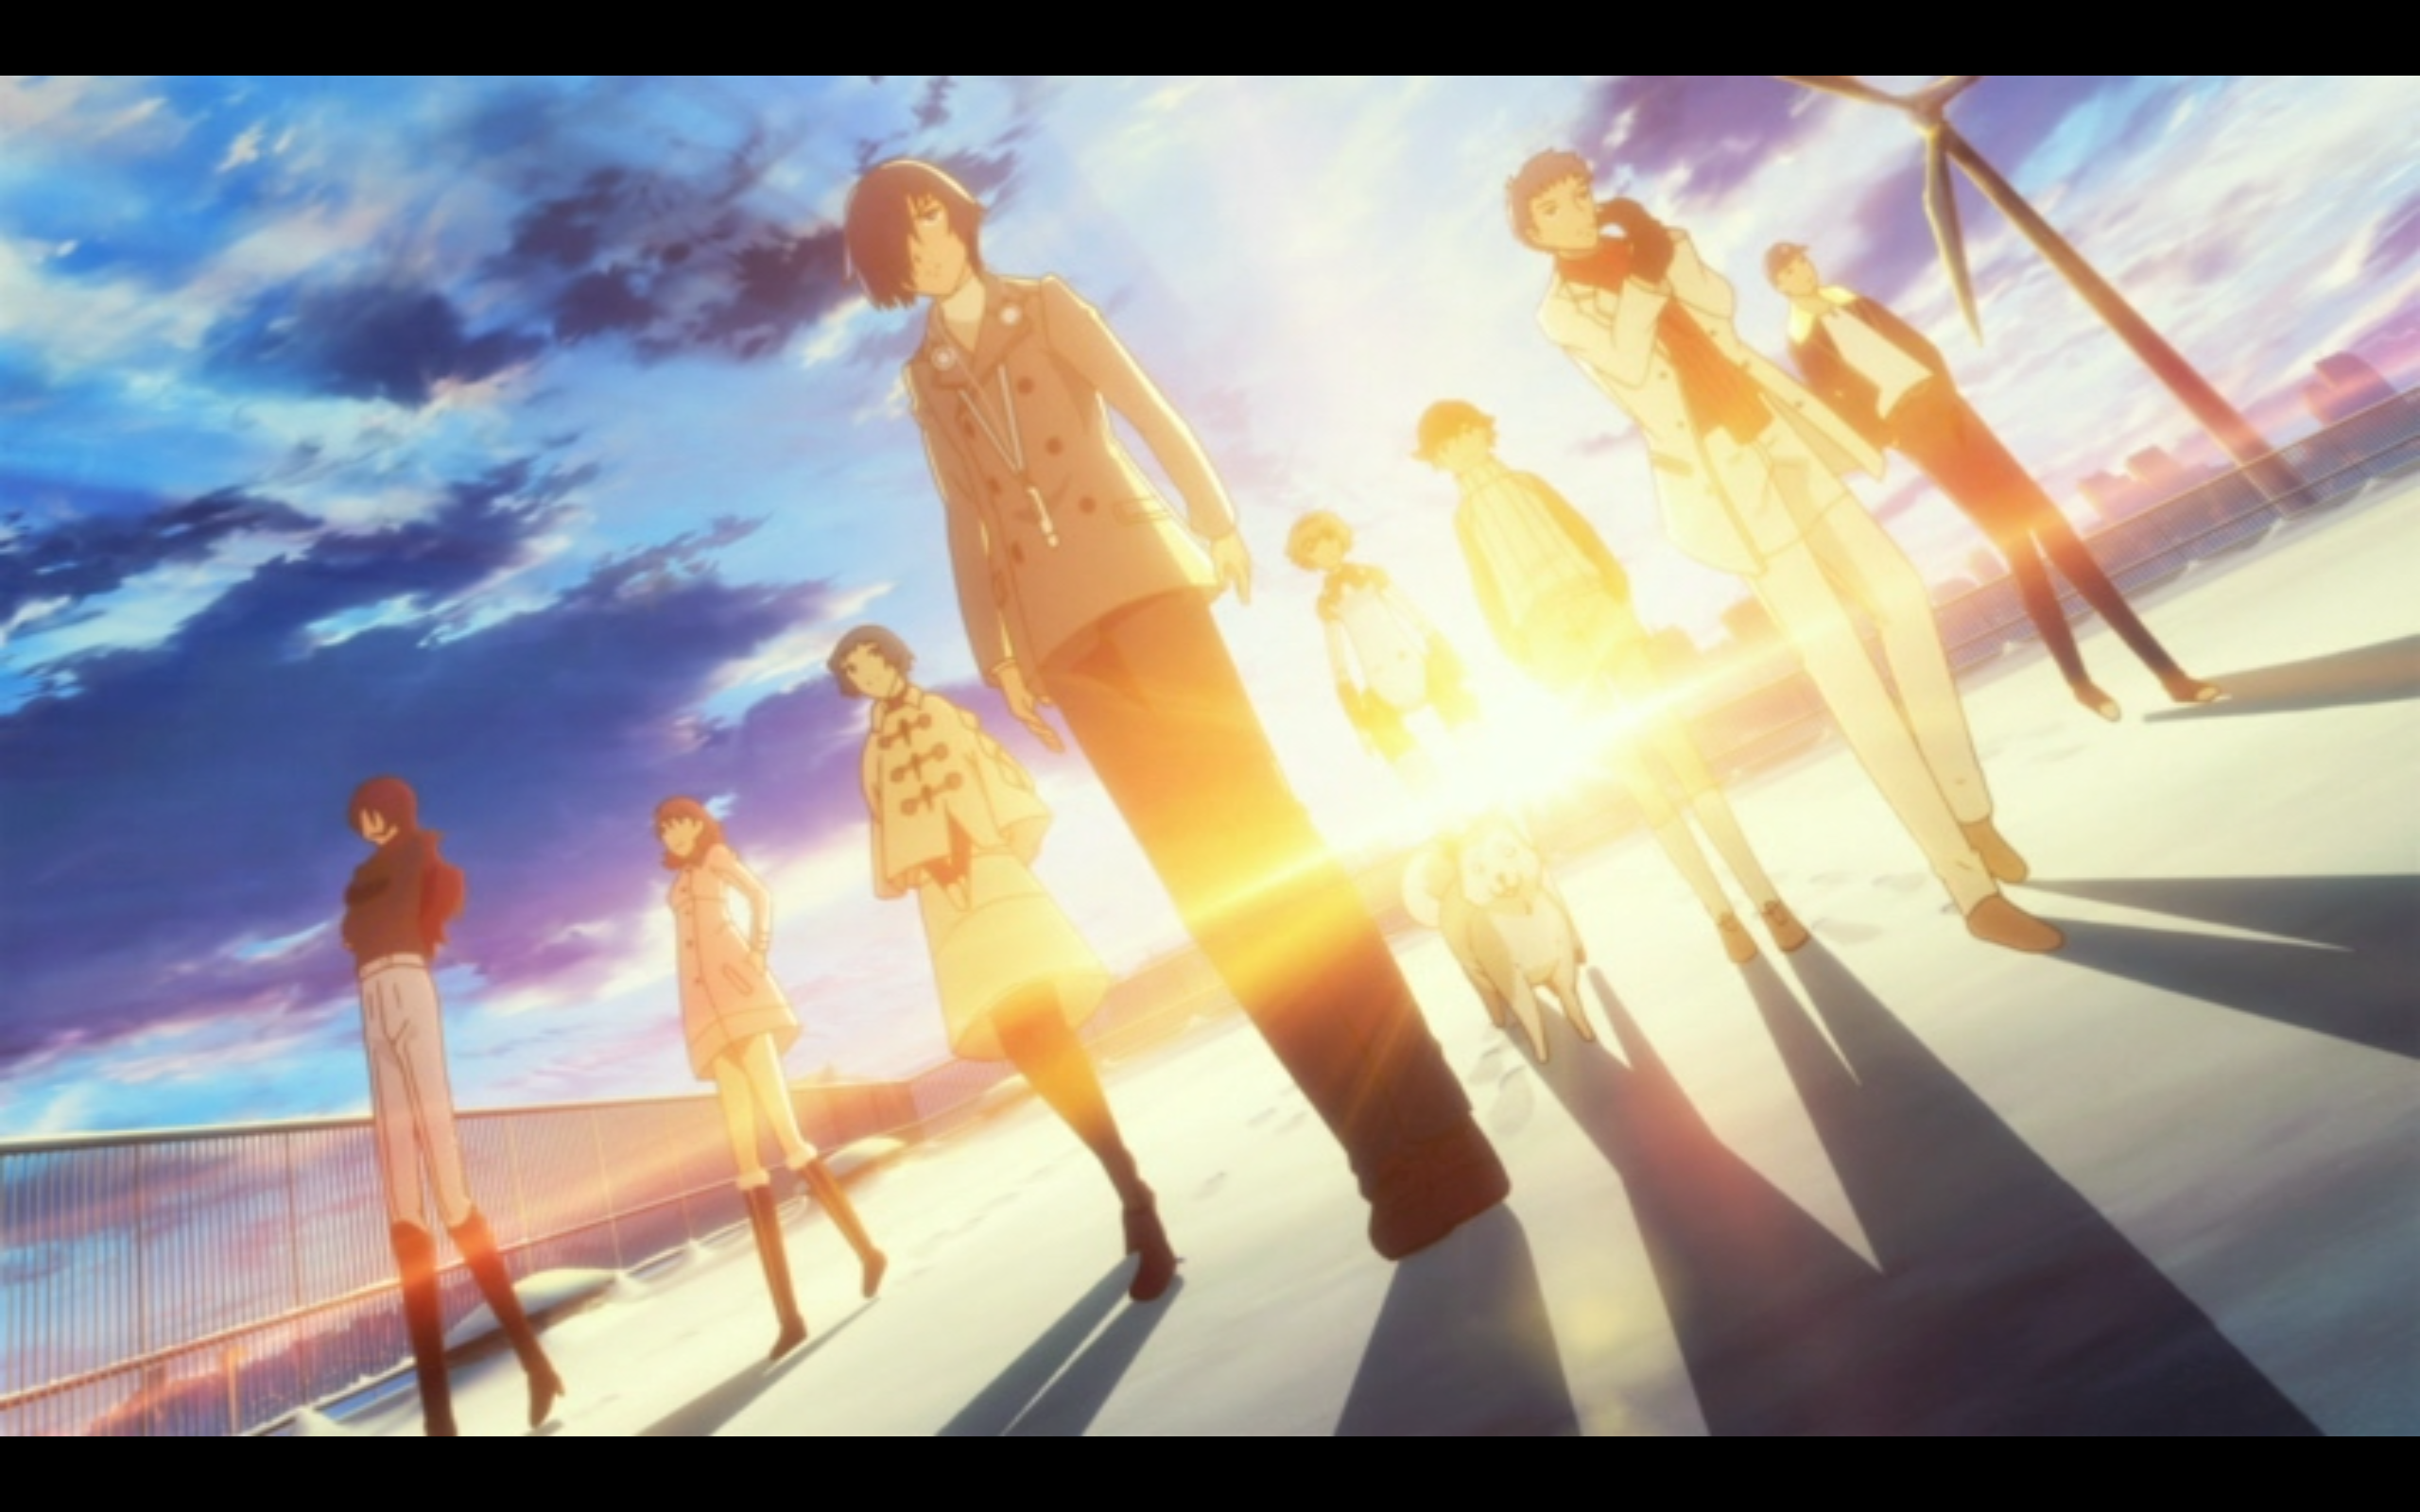 Persona-3-movie-4-shot-1.png